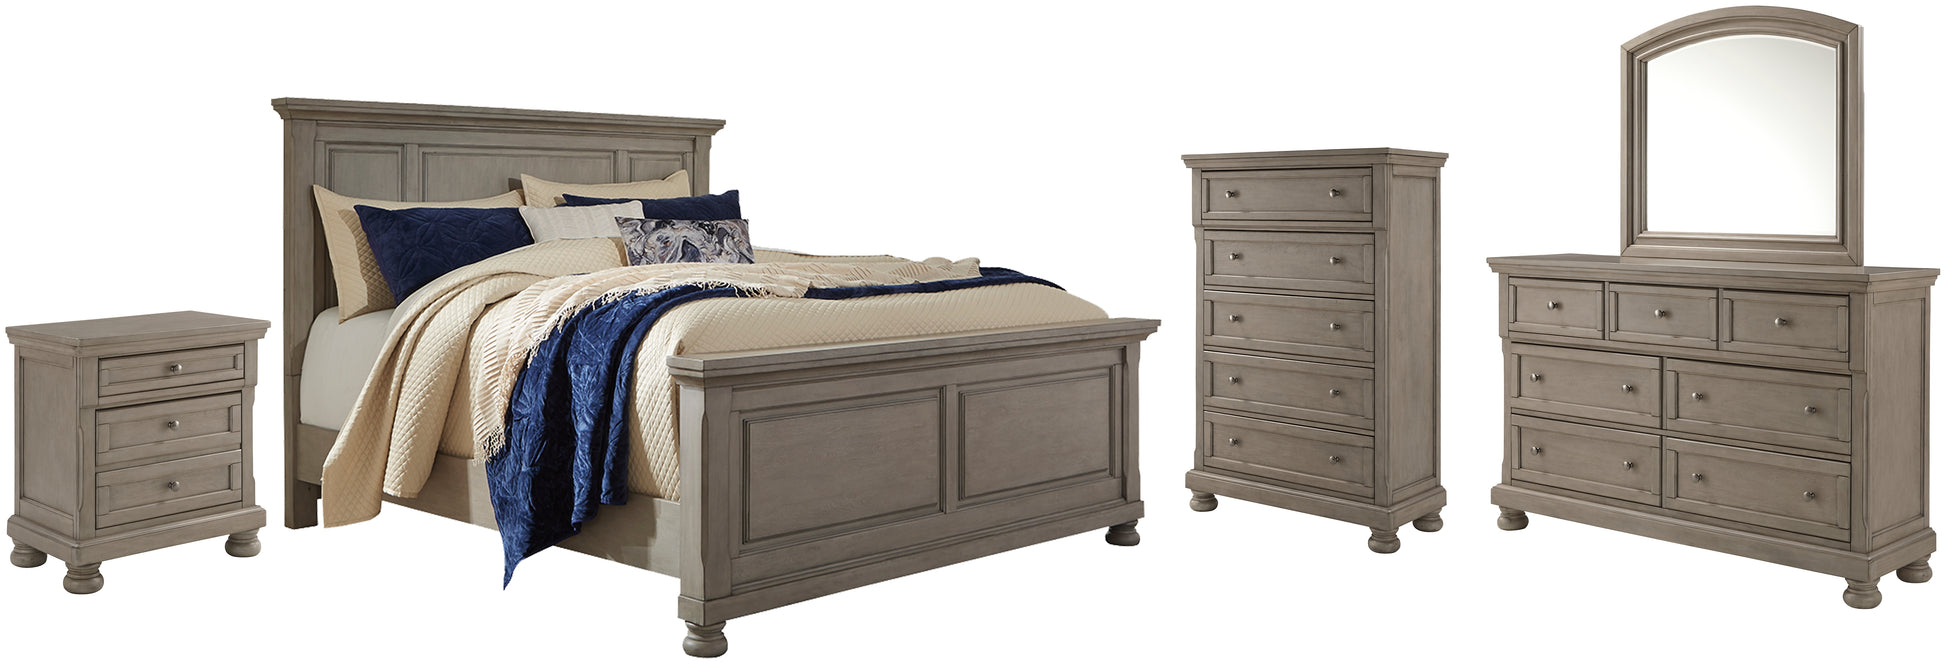 Lettner King Panel Bed with Mirrored Dresser, Chest and Nightstand Wilson Furniture (OH)  in Bridgeport, Ohio. Serving Bridgeport, Yorkville, Bellaire, & Avondale